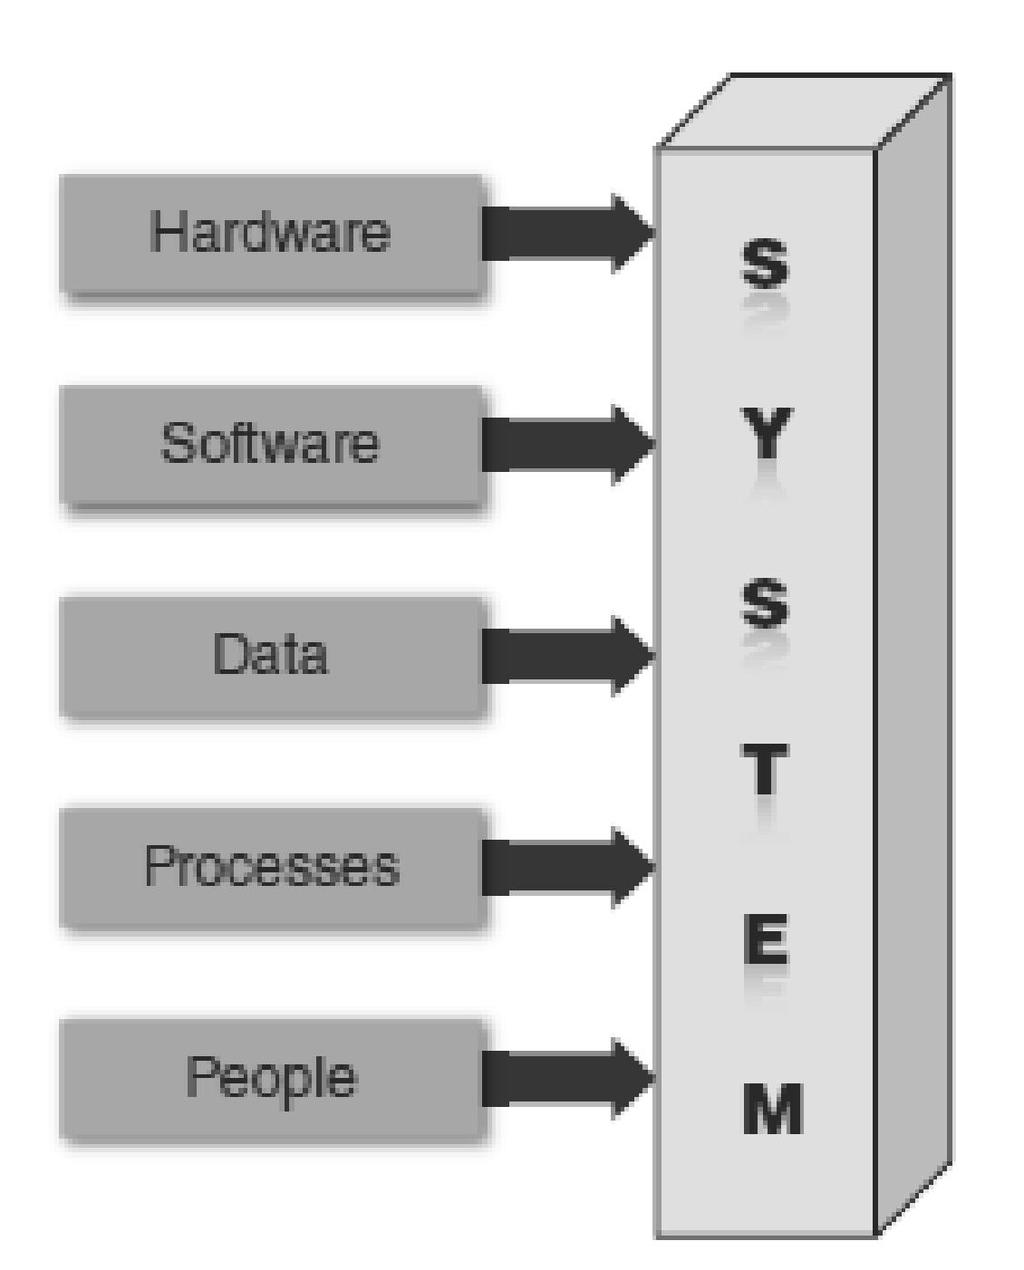 A system is a set of related components that produces specific results Mission-critical systems are vital to a company s operations